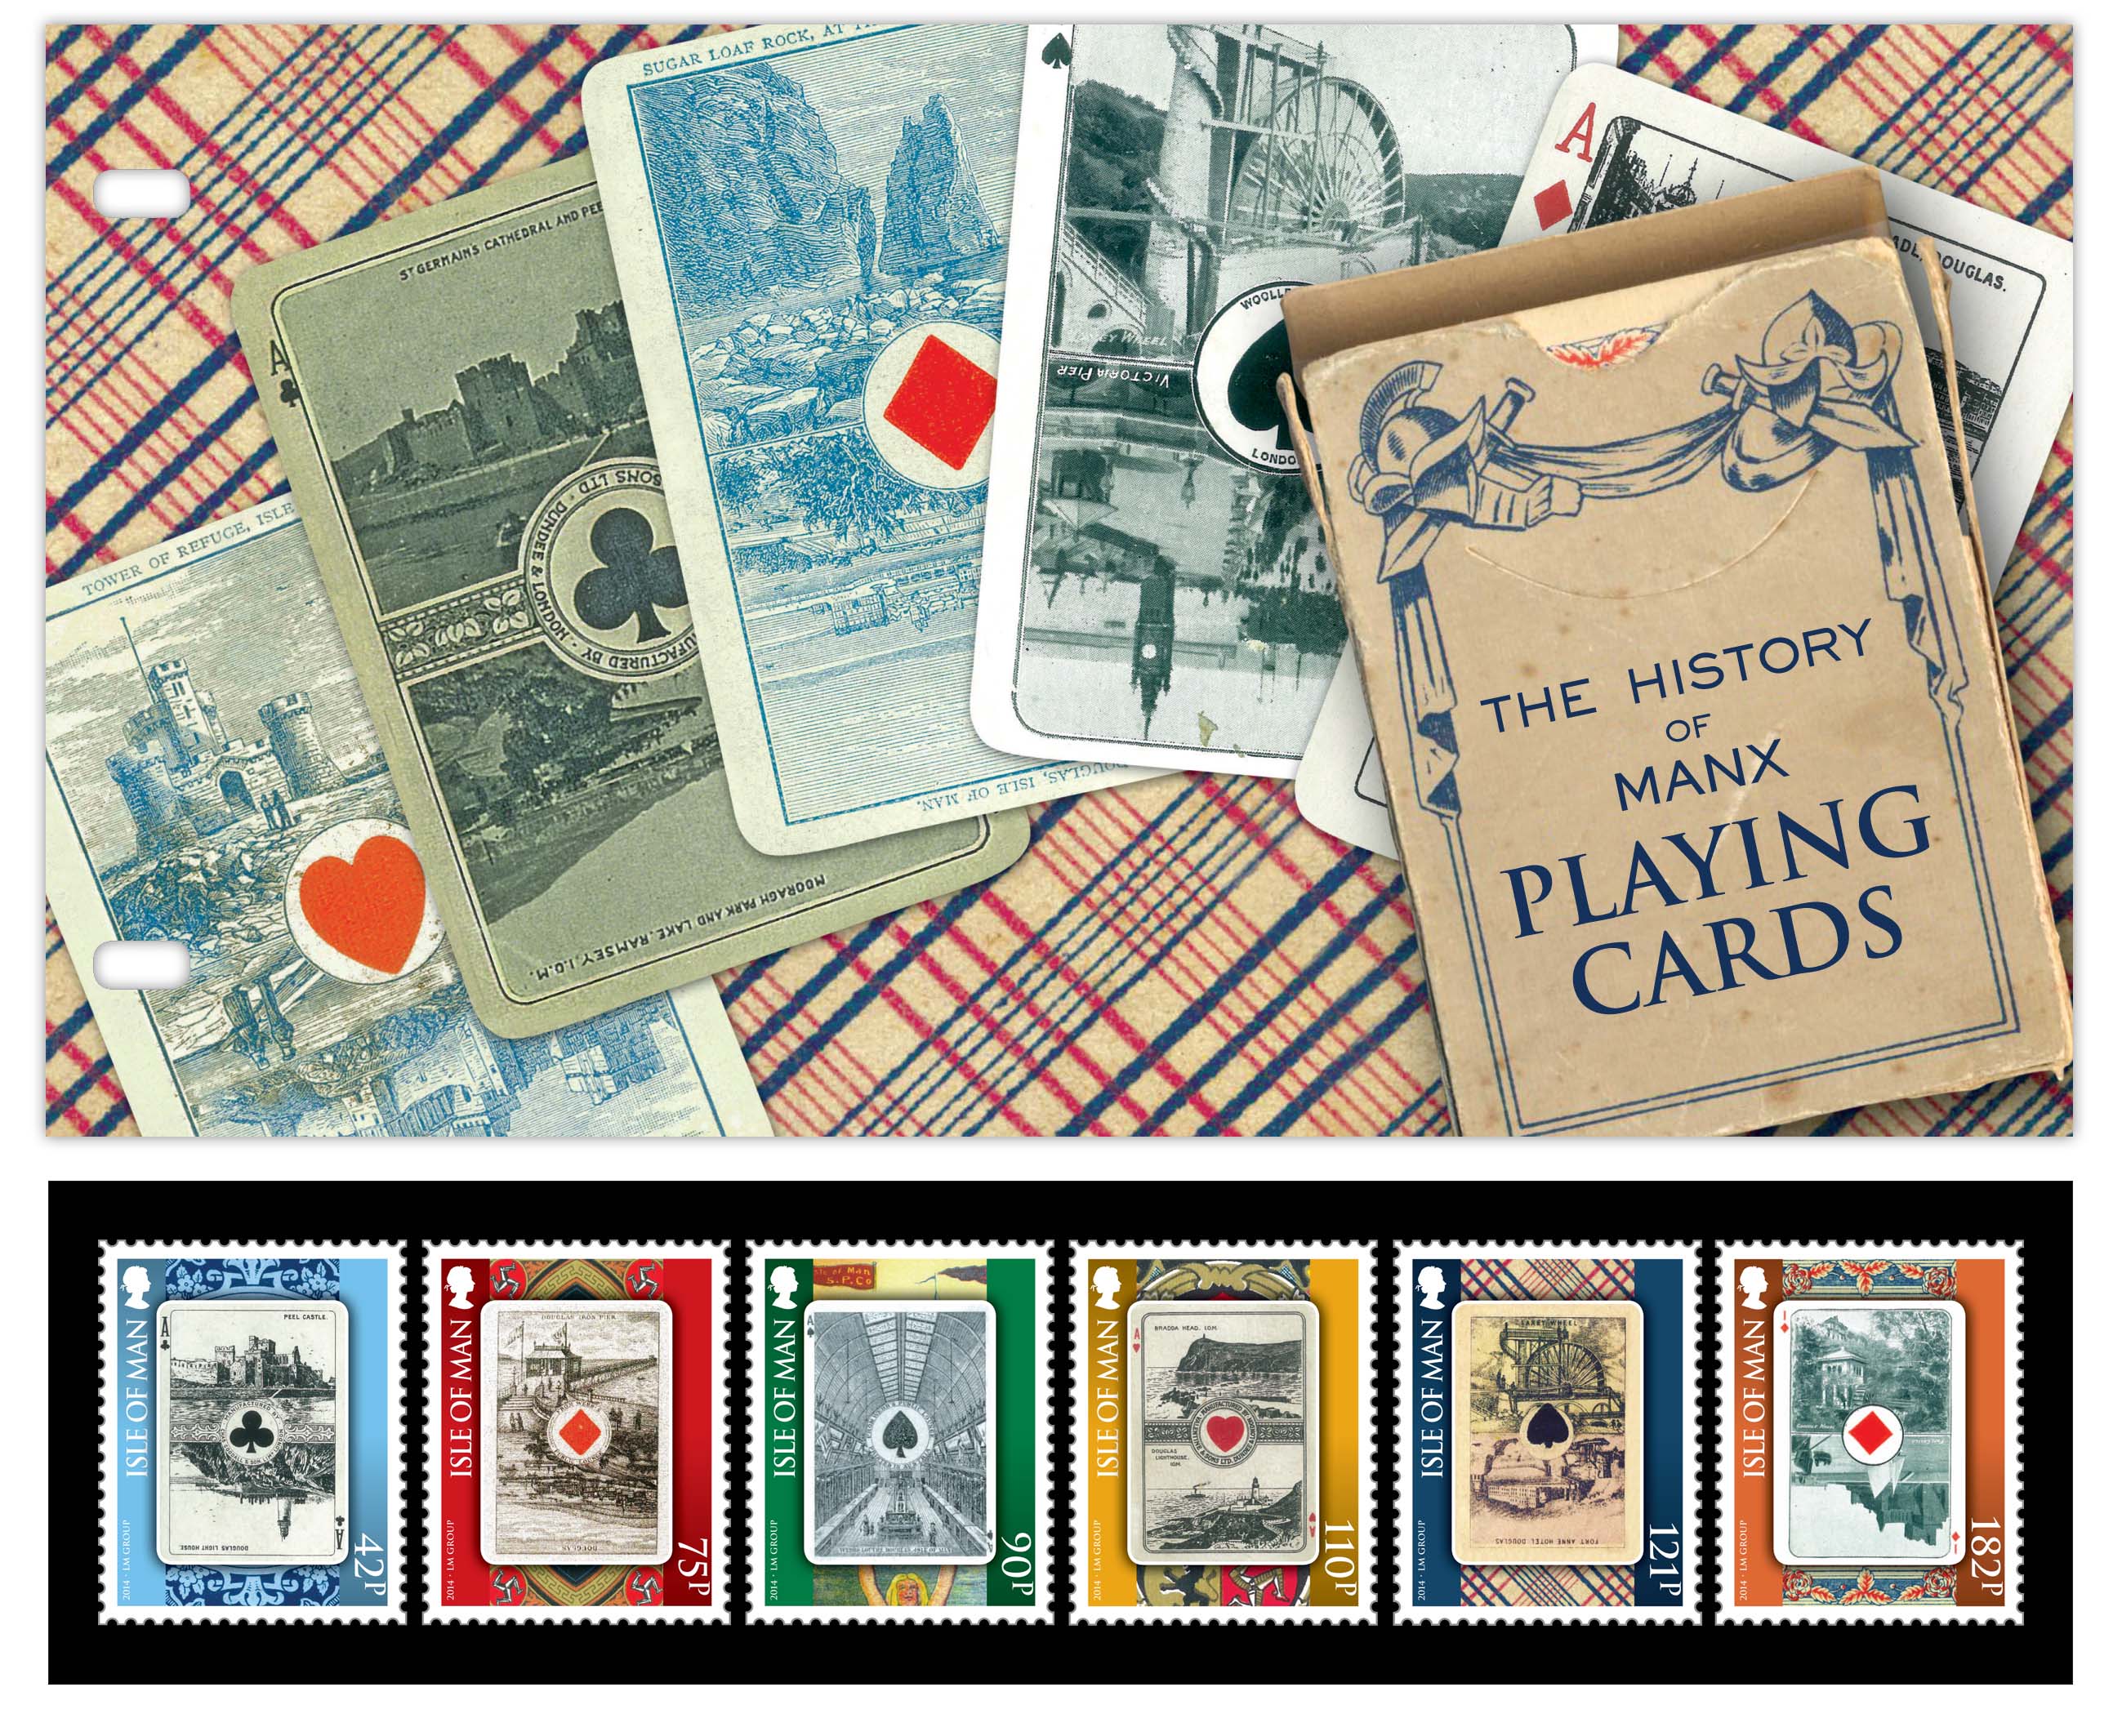 The History of Manx Playing Cards - Isle of Man Post Office